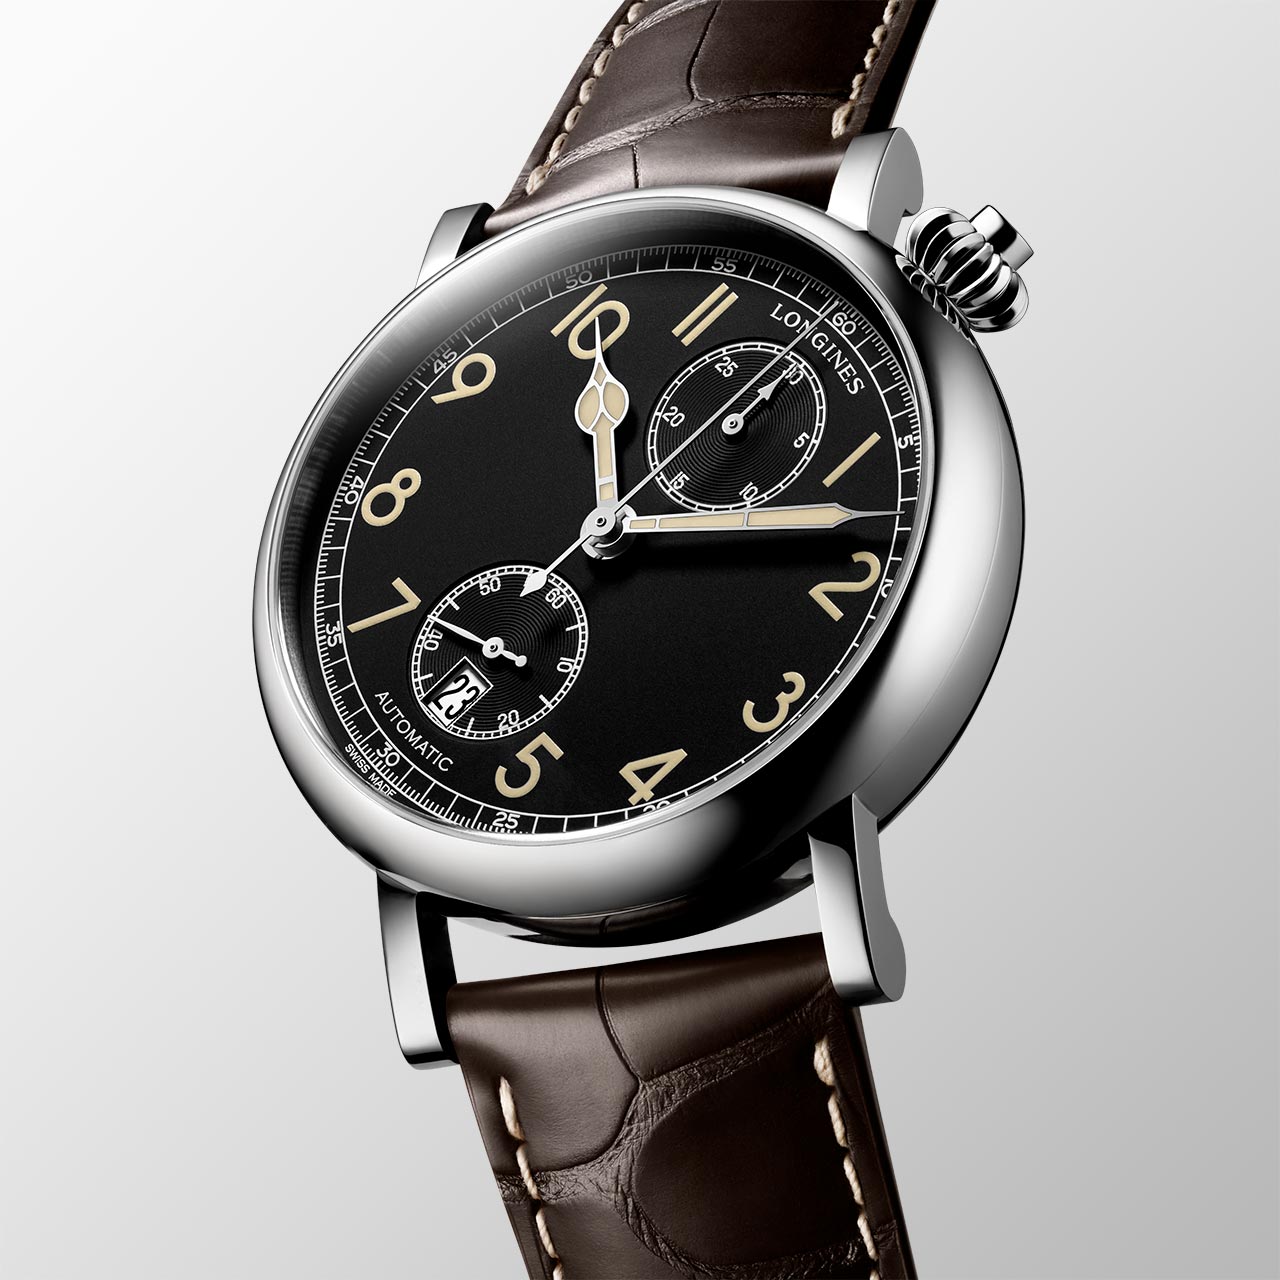 Longines - Avigation Watch Type A-7 1935 | Time and Watches | The watch ...